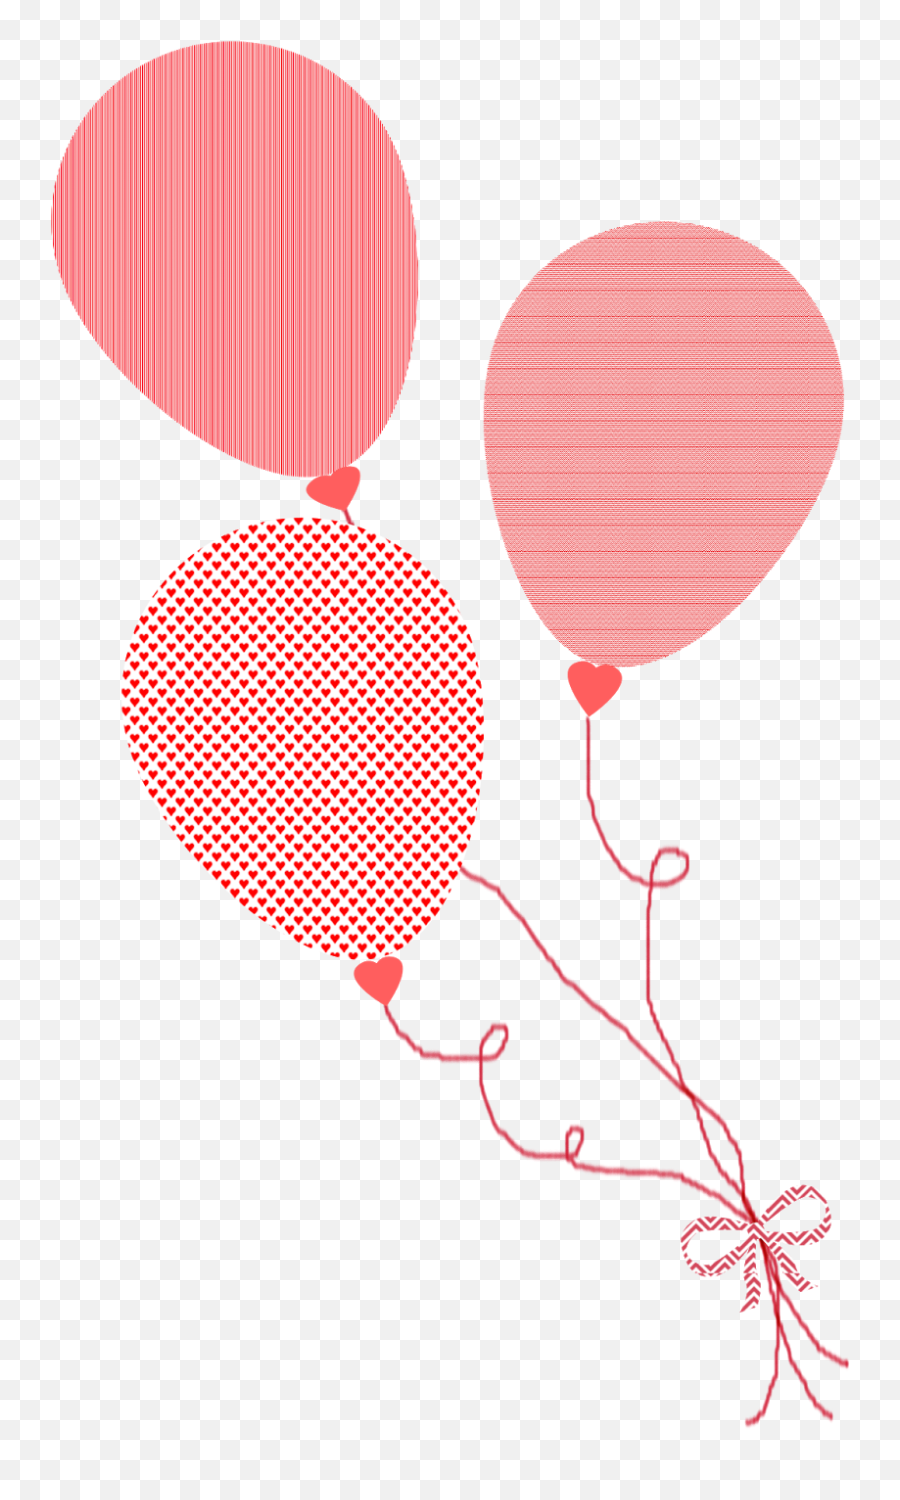 Download Balloons Cl - Balloon Drawing Png Transparent Balloon Emoji,Balloons Transparent Background